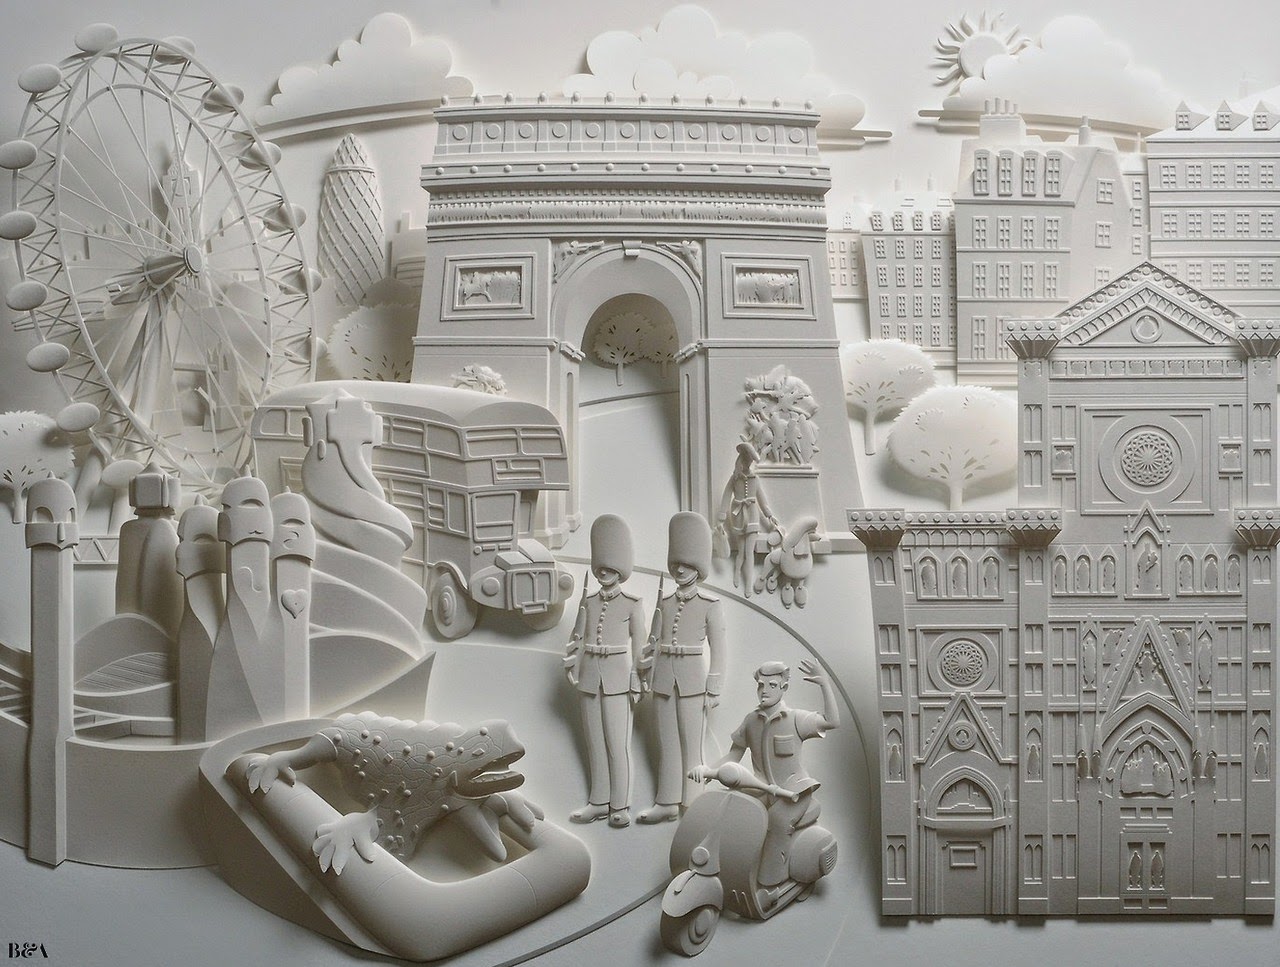 Simply Creative 3D Paper Sculptures By Jeff Nishinaka